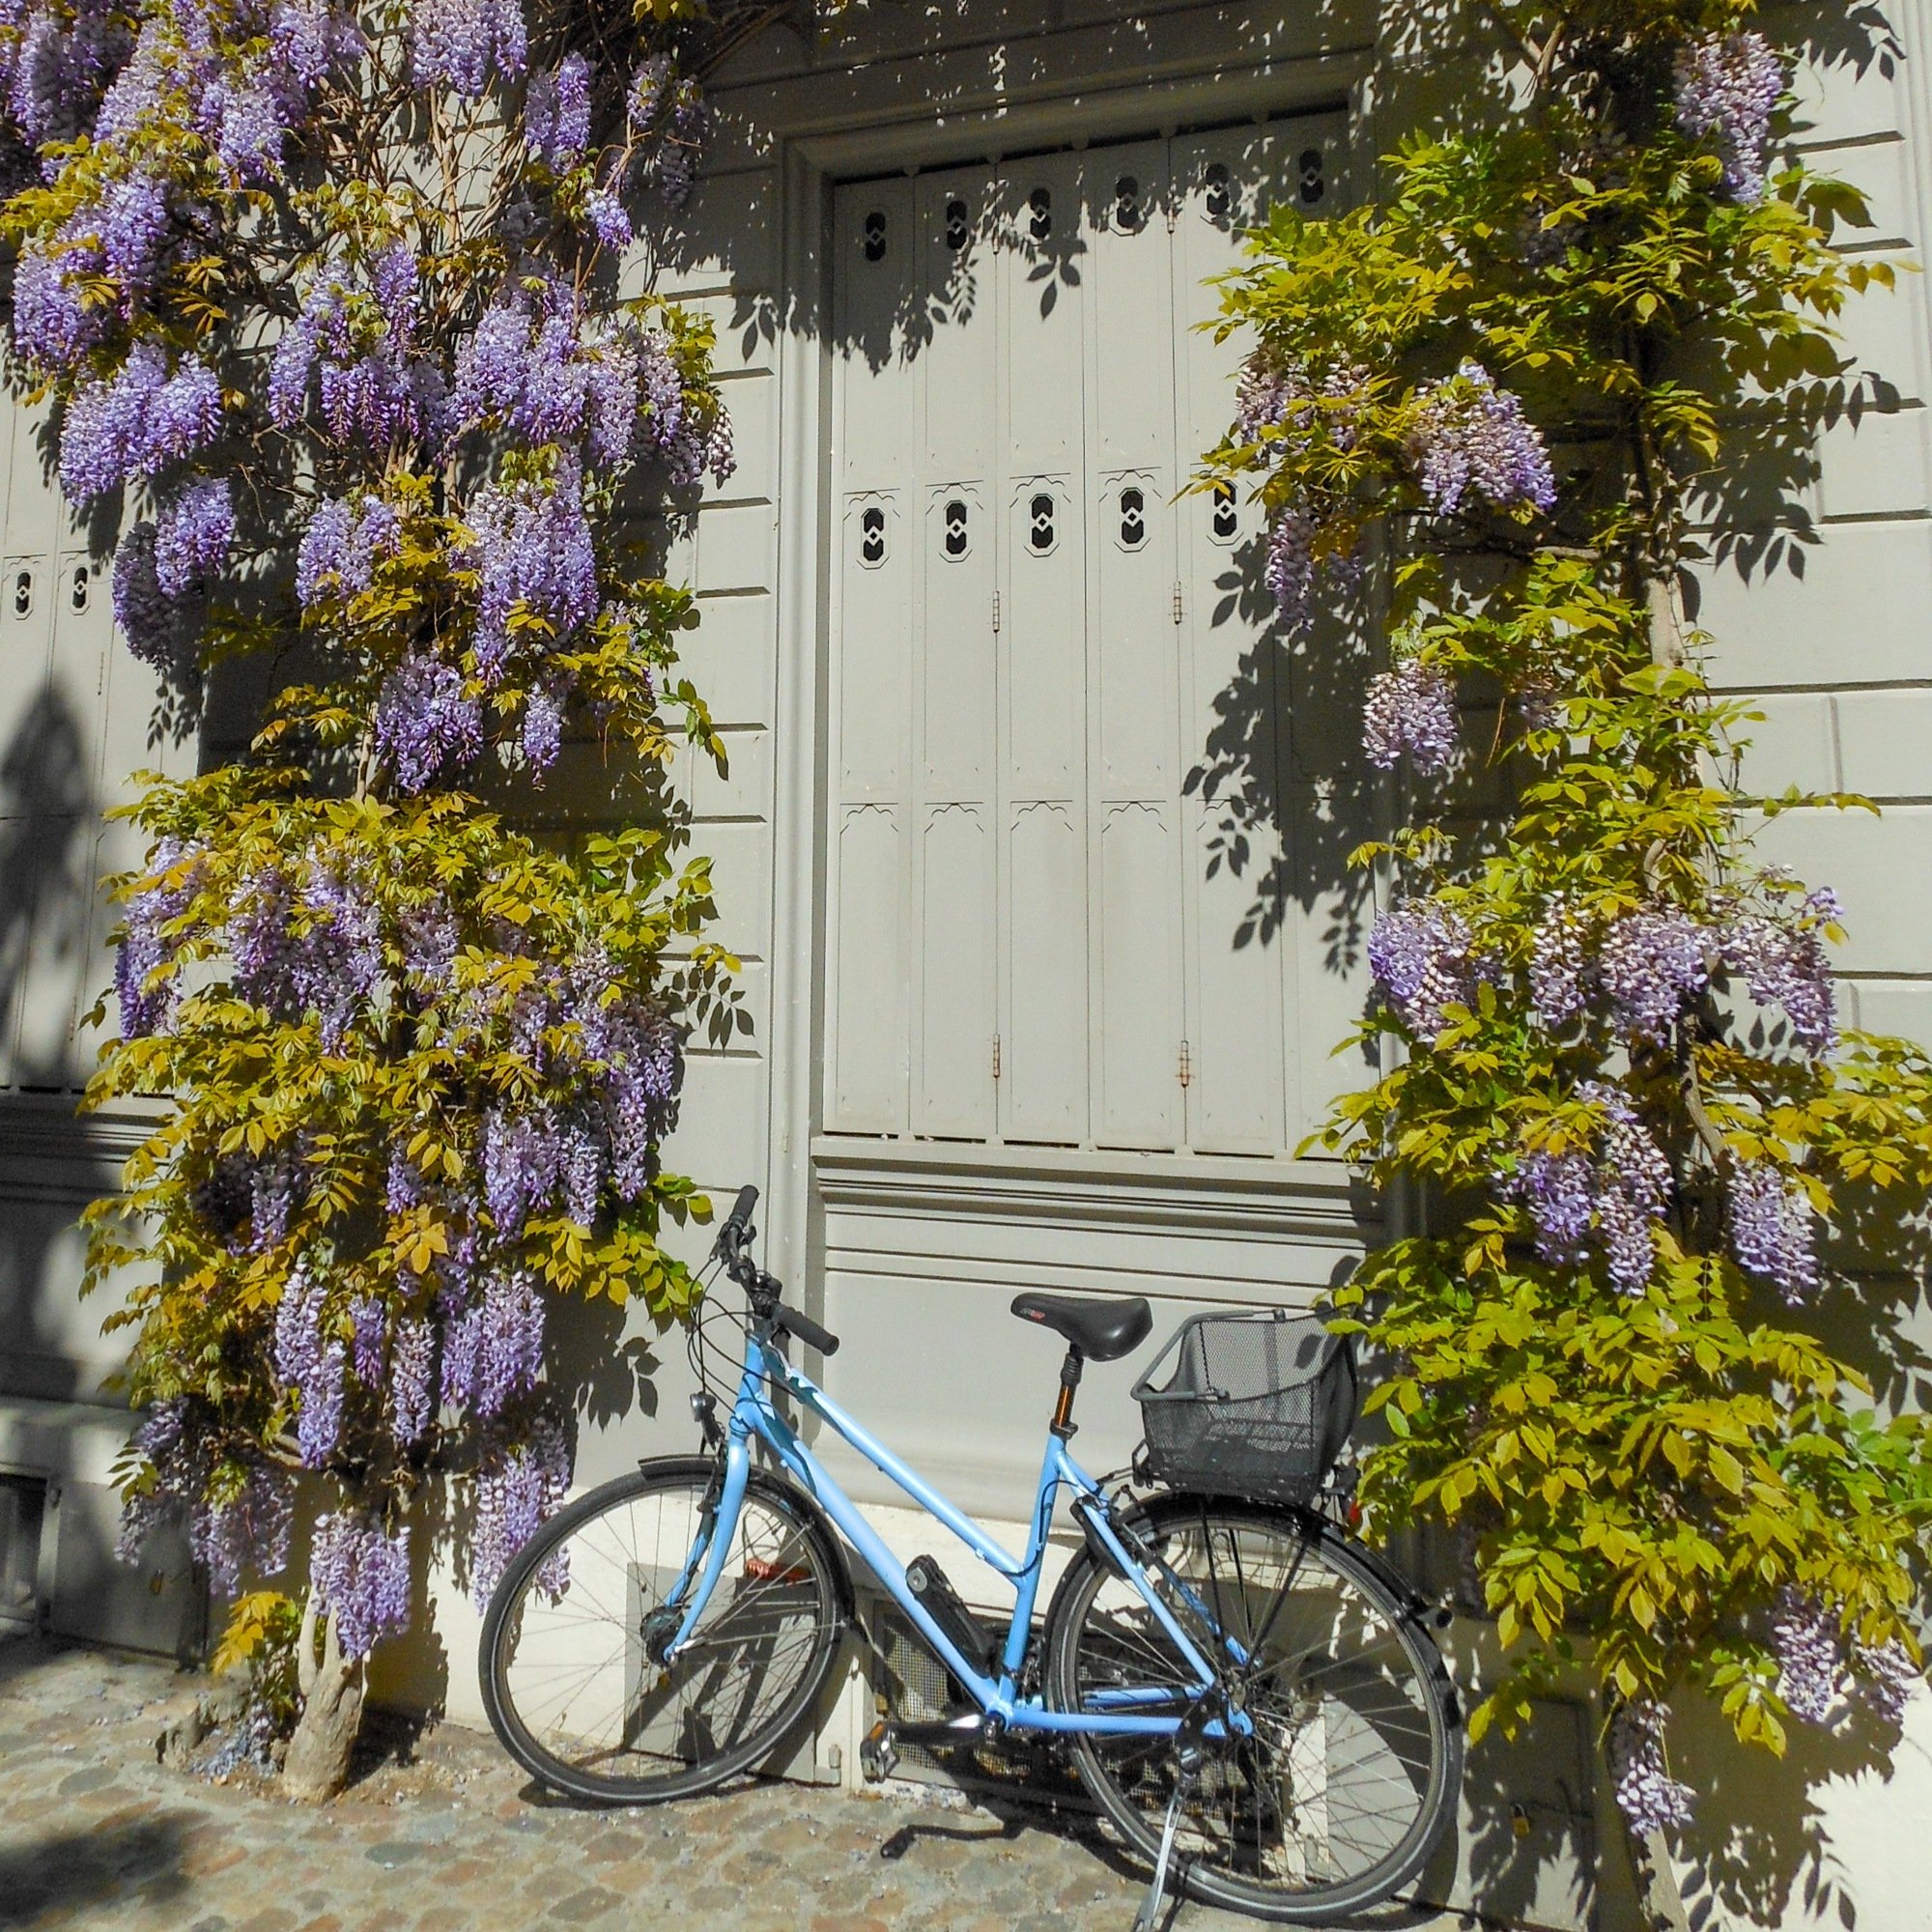 Bicycle surrounded by wisteria in Basel, Switzerland